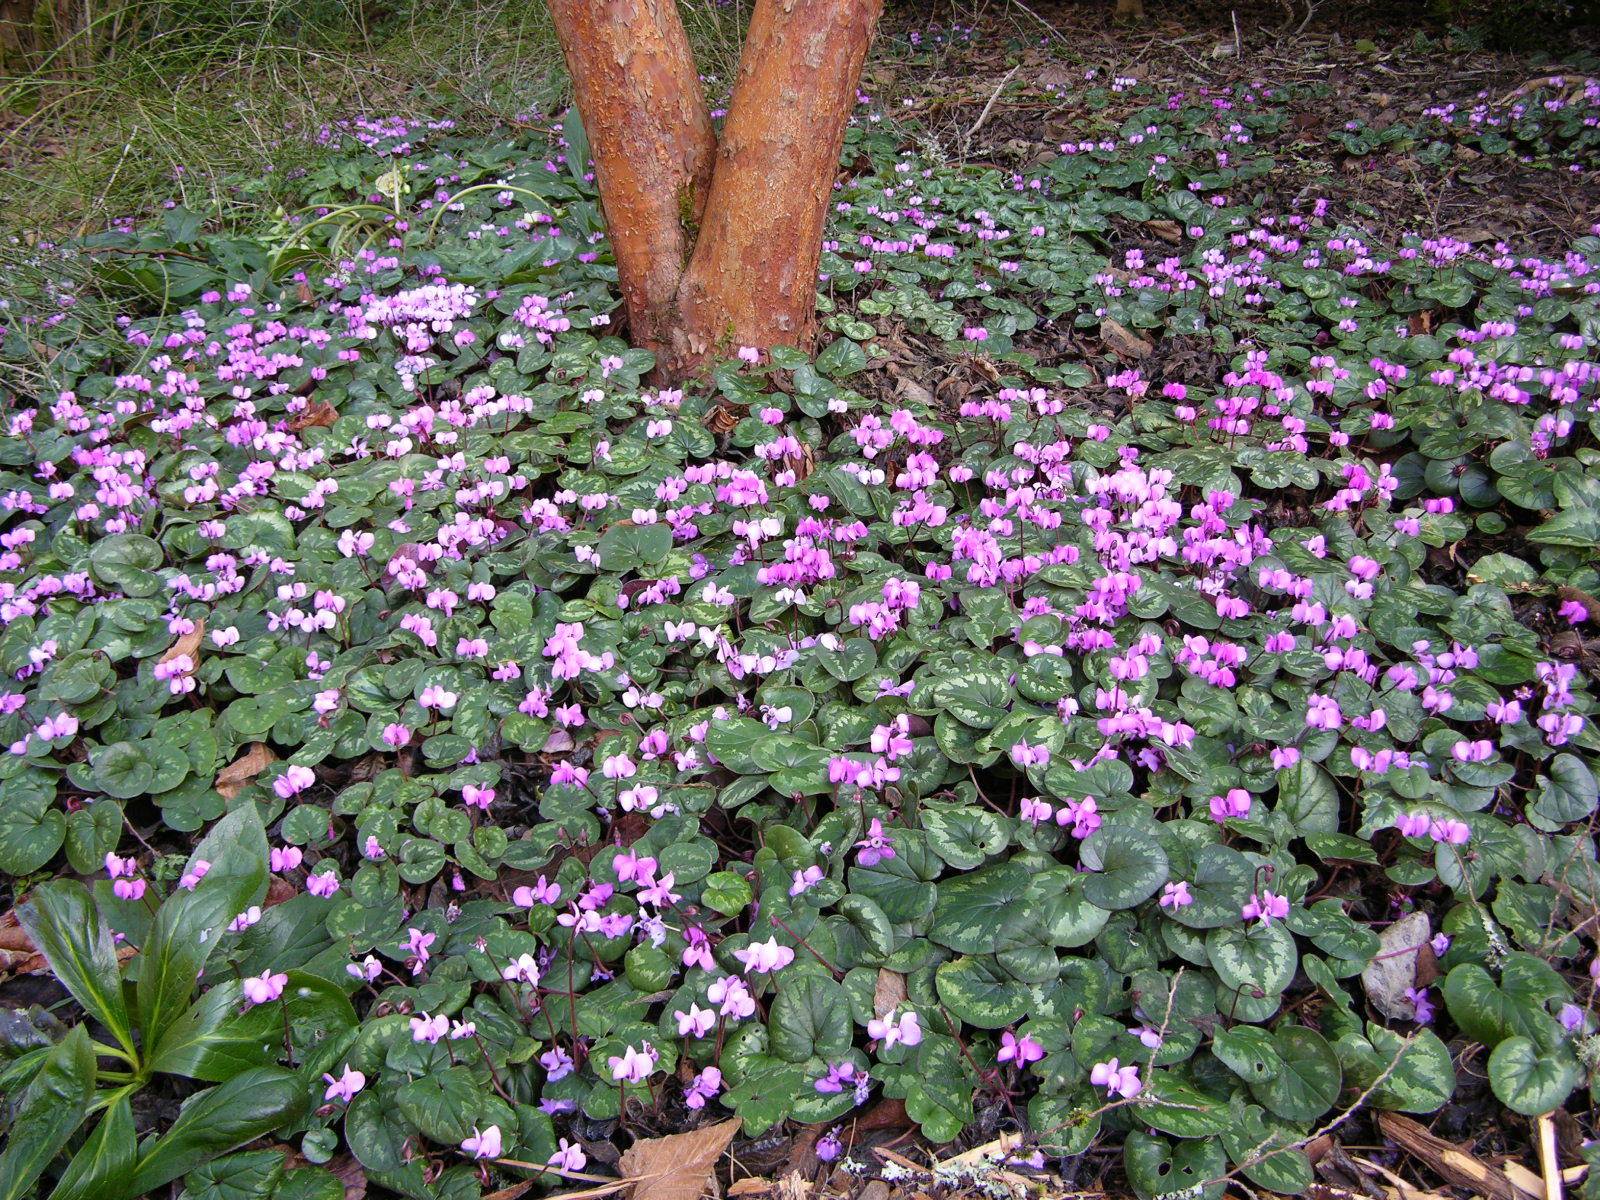 The ivy-leaved cyclamen, C. hederifolium, blooms in fall (usually September into October) with a generosity that warms the gardener's heart.